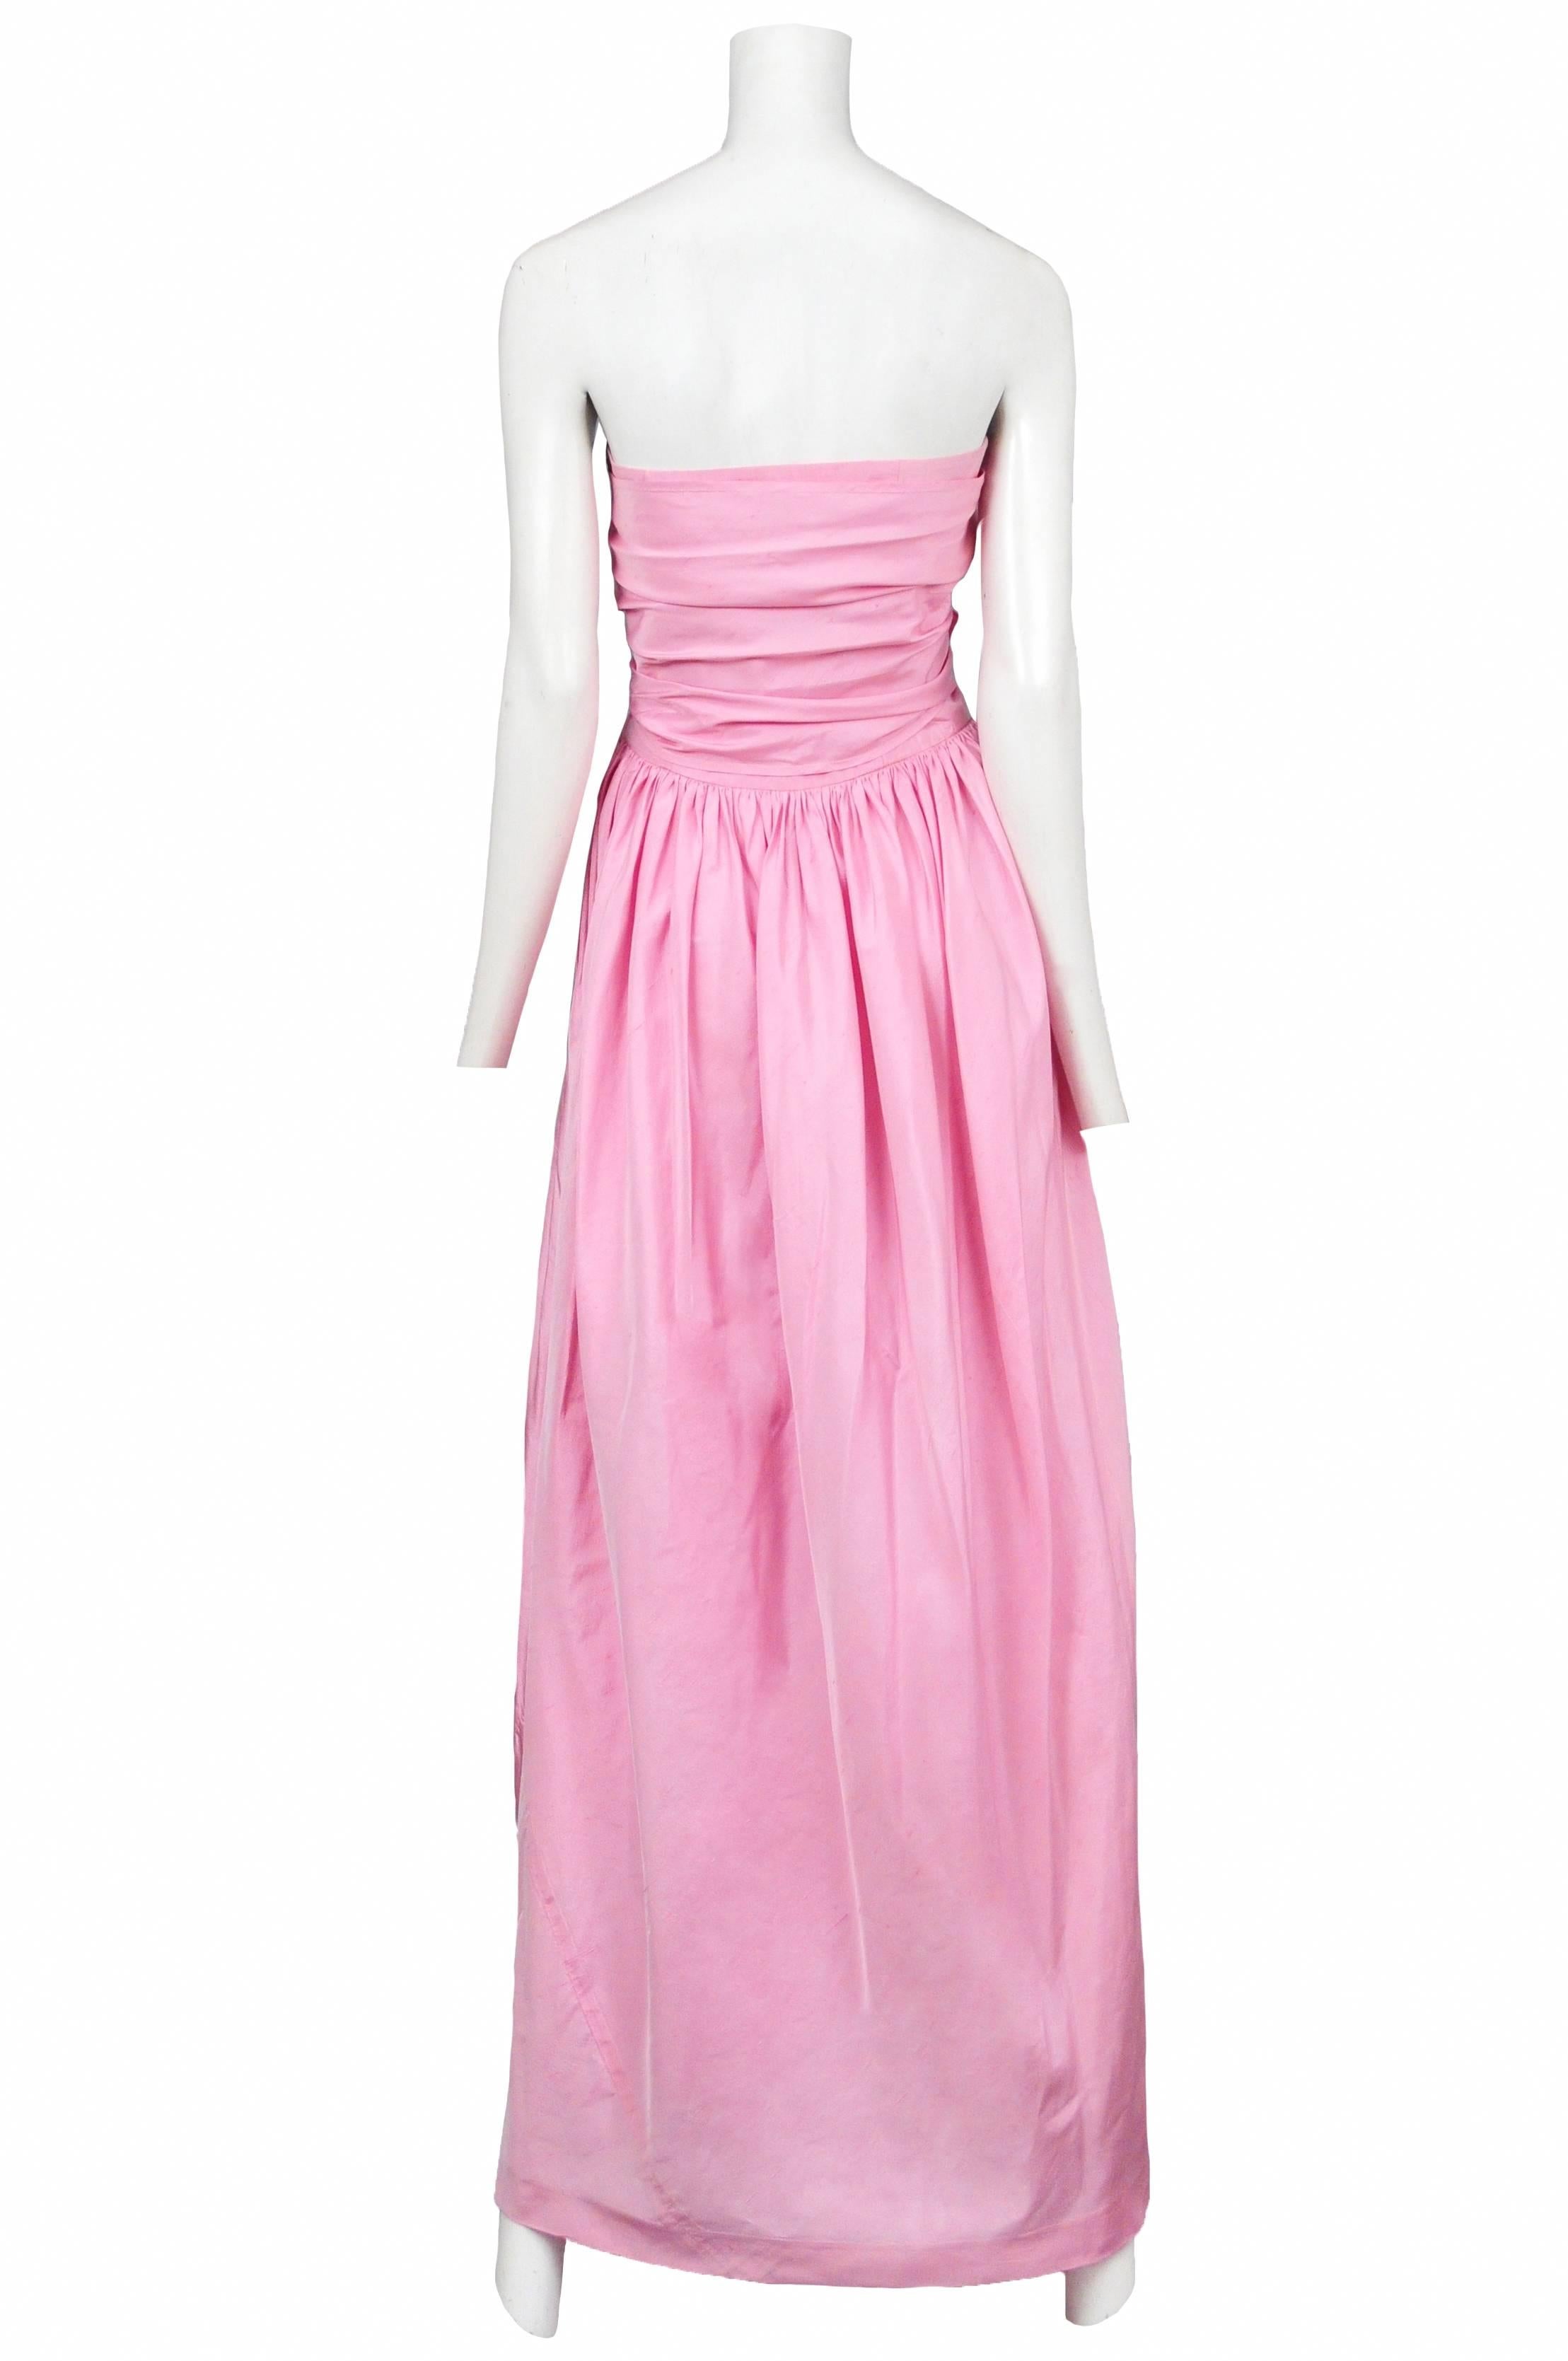 Vintage Lanvin pink taffeta strapless gown featuring a gathered waist and a large tied bow at the bust. 